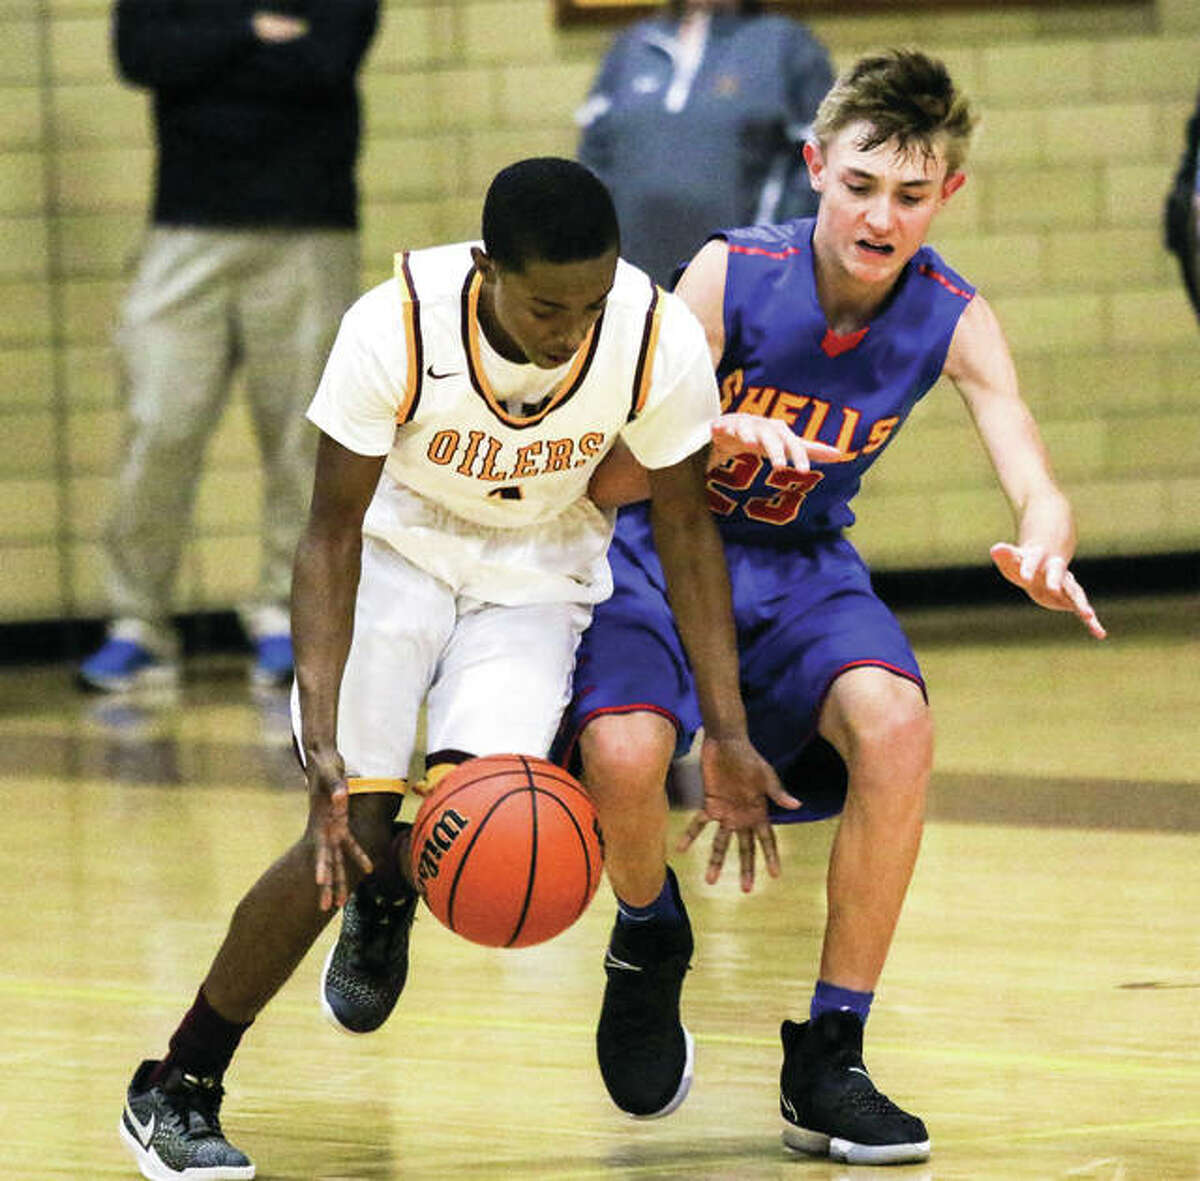 EA-WR’s Tavion Walker (left) beats Roxana’s Gavin Huffman to the ball during a game Dec. 8 at Memorial Gym in Wood River. The Shells, who open holiday tourney play at the Duster Thomas Classic in Pinckneyville on Friday, are 2-7 in a rebuilding season that has freshman playing major roles.